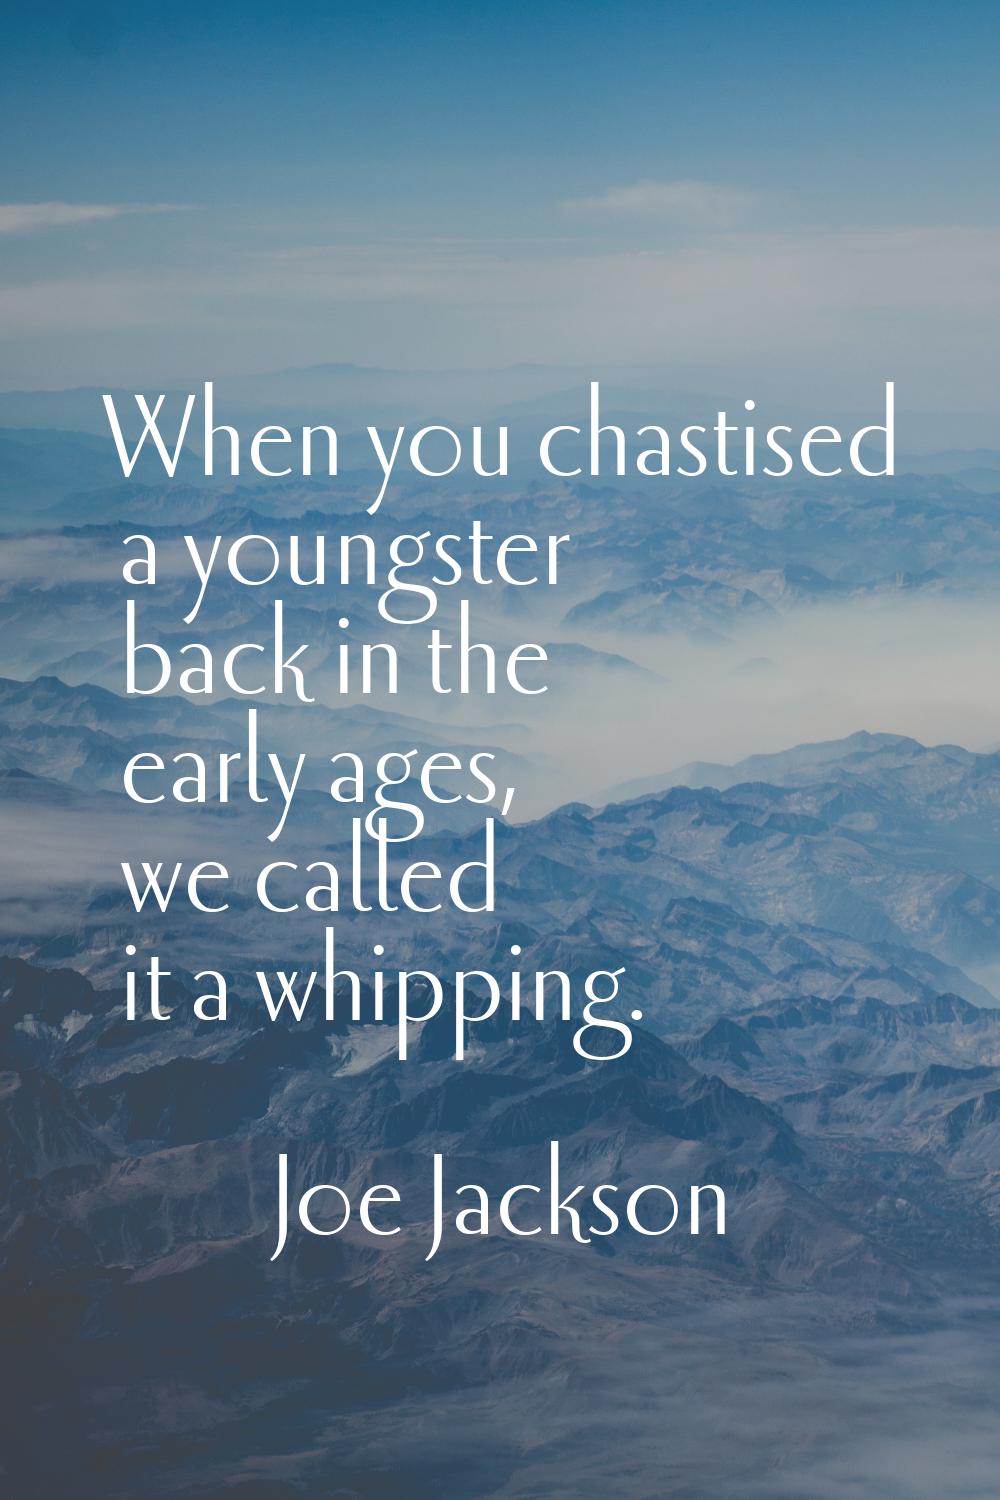 When you chastised a youngster back in the early ages, we called it a whipping.